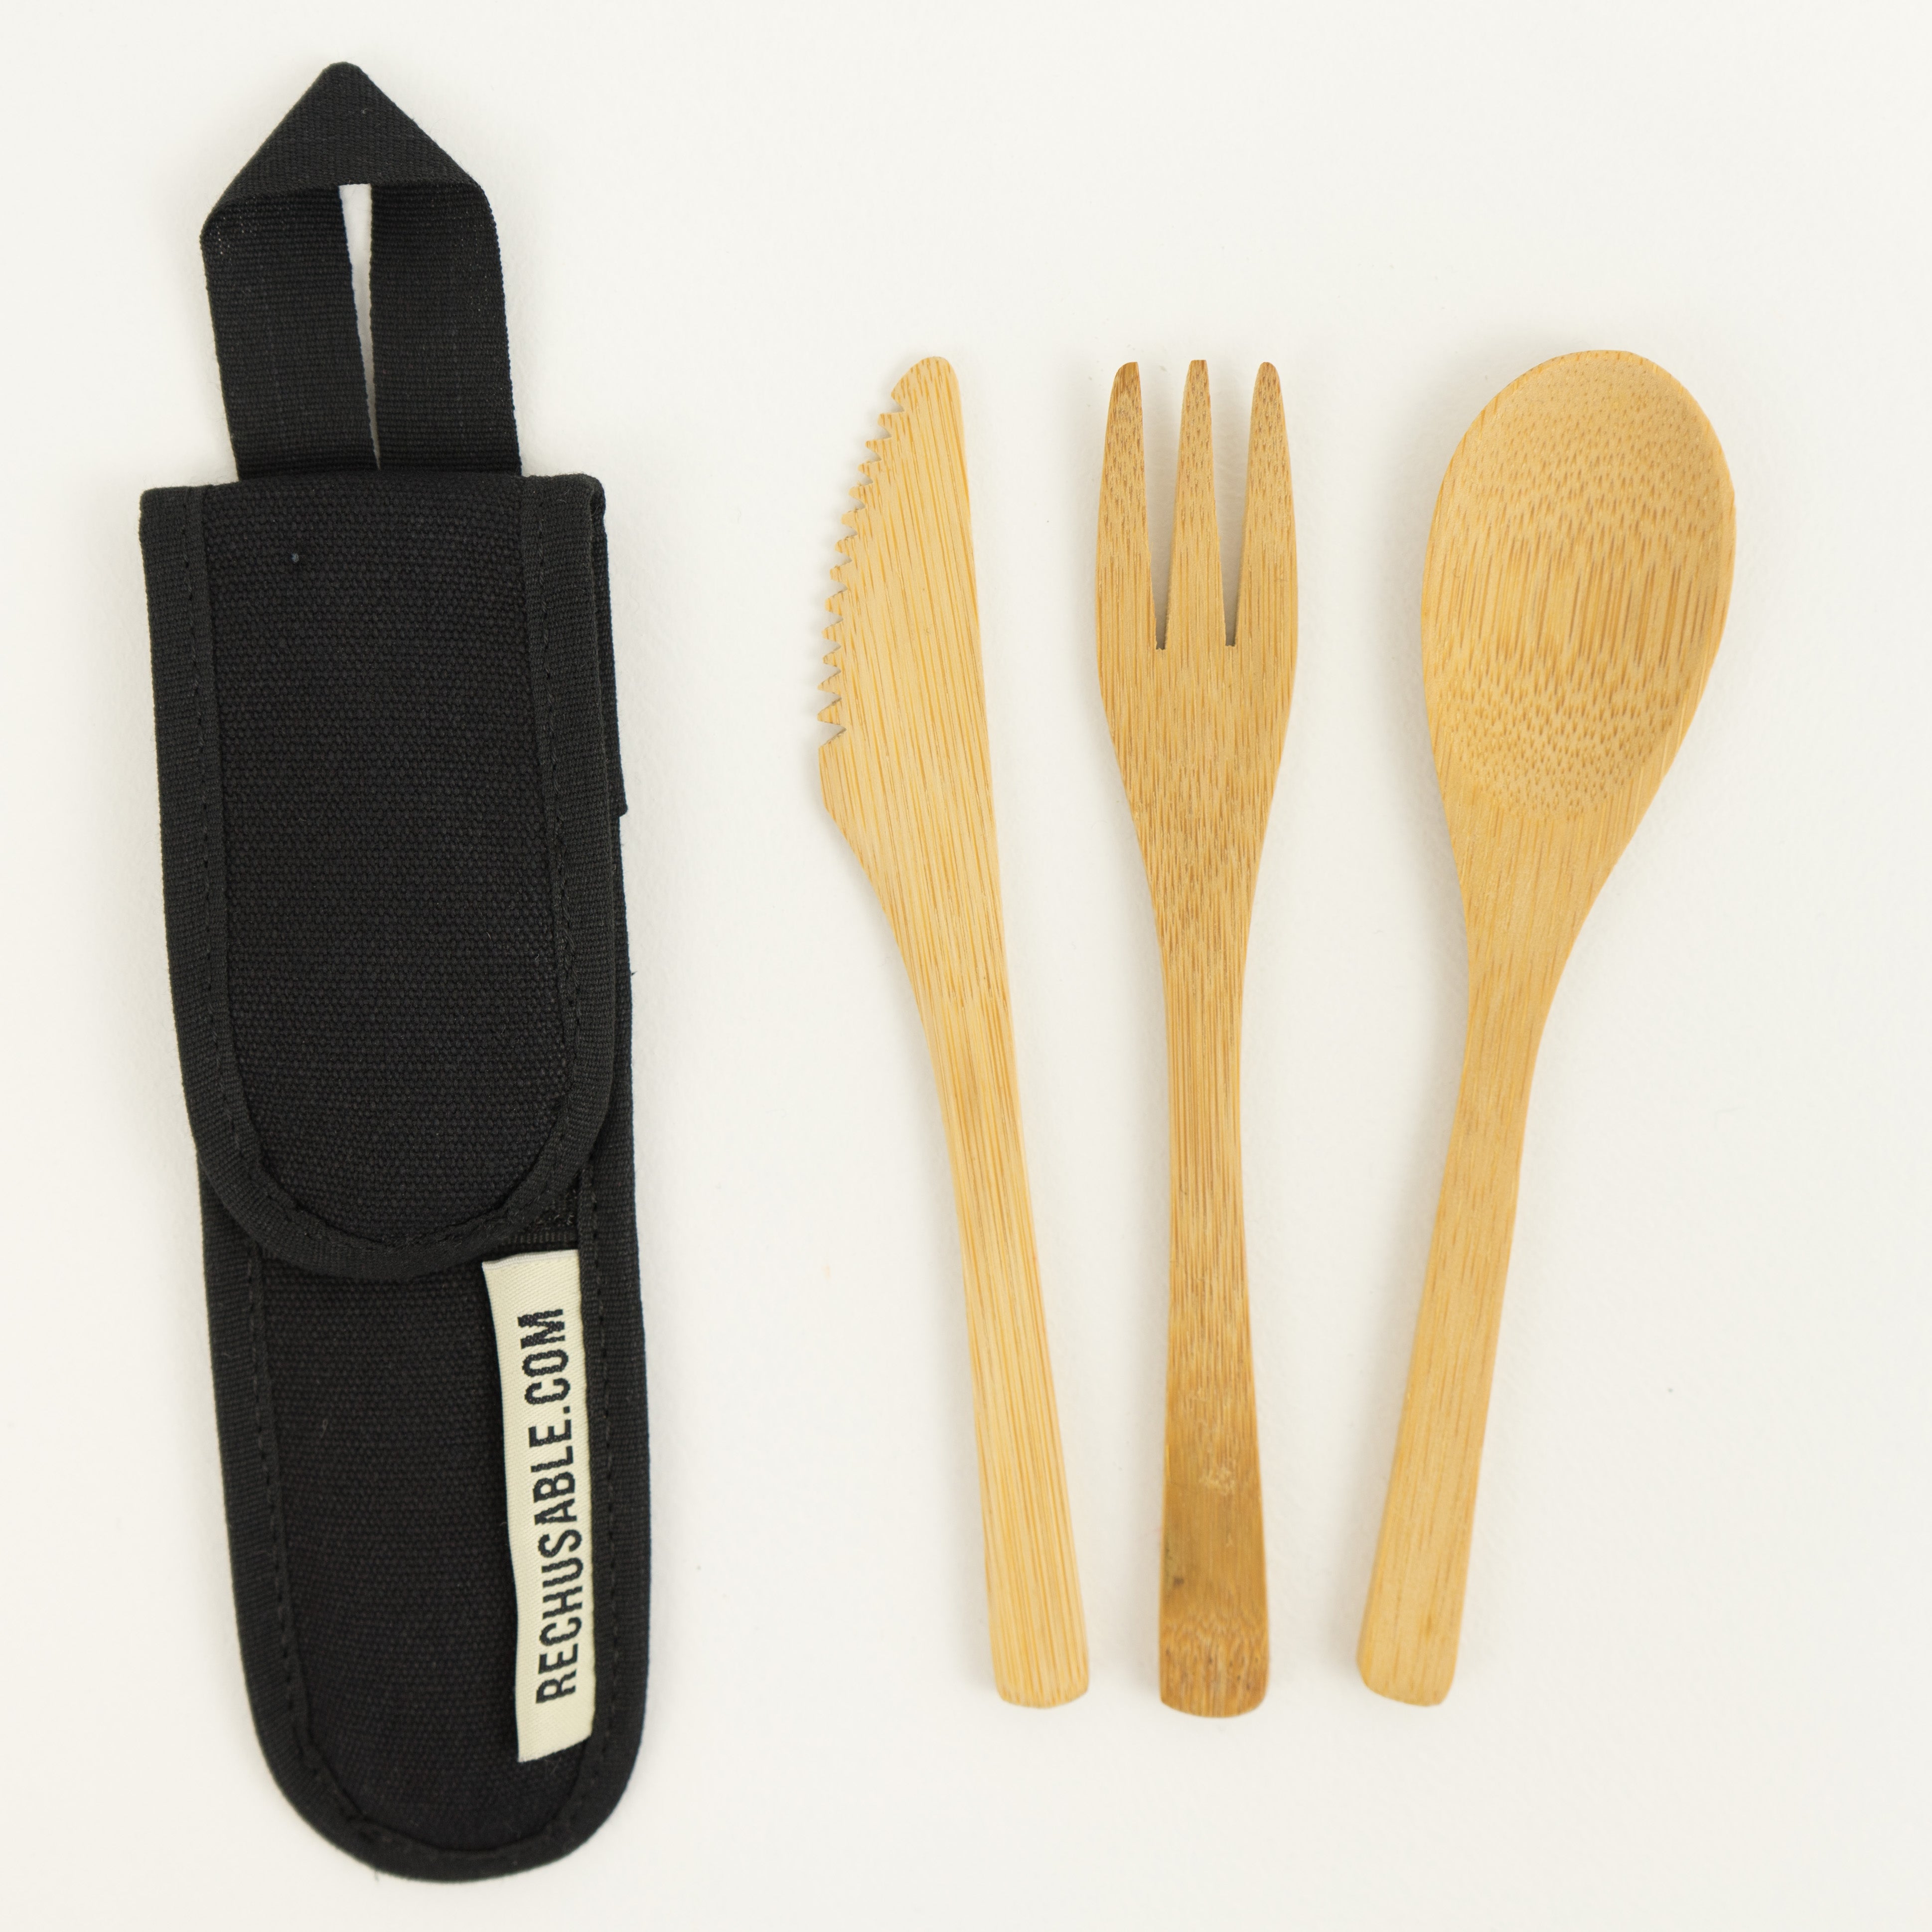 ReChusable Bamboo Cutlery Kit & Cotton Pouch New Zealand Plastic Free Store